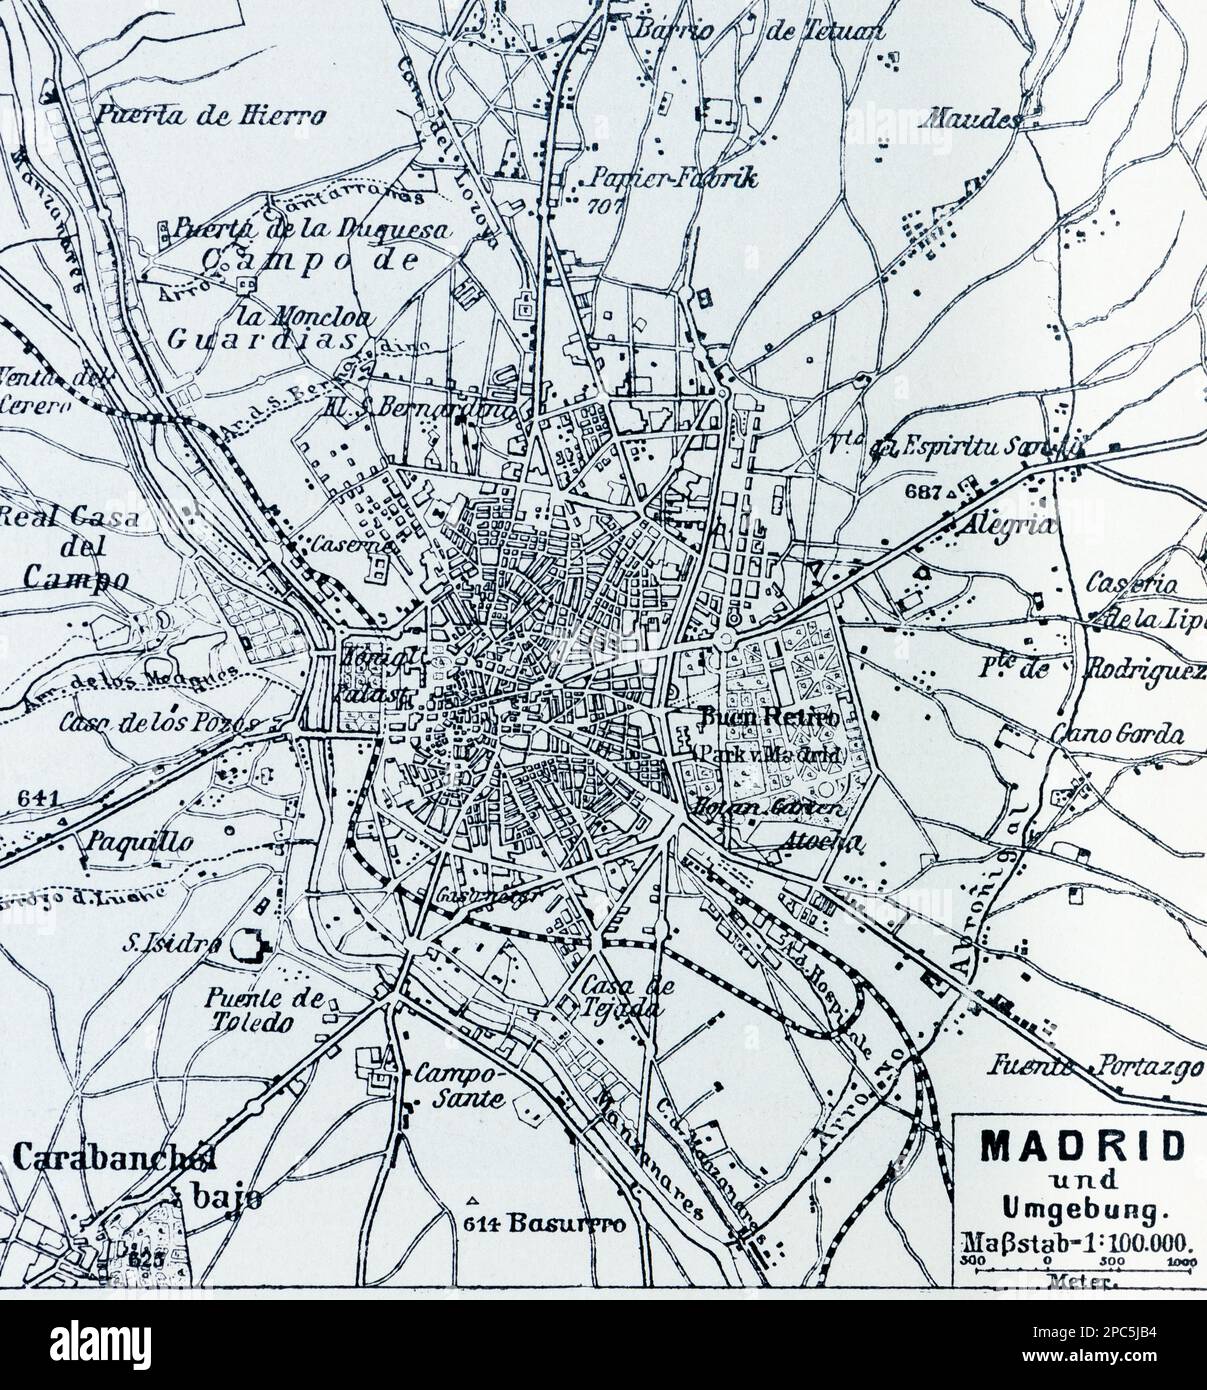 City map of Madrid and its surroundings, Madrid, Spain, Southern Europe, illustration 1896 Stock Photo